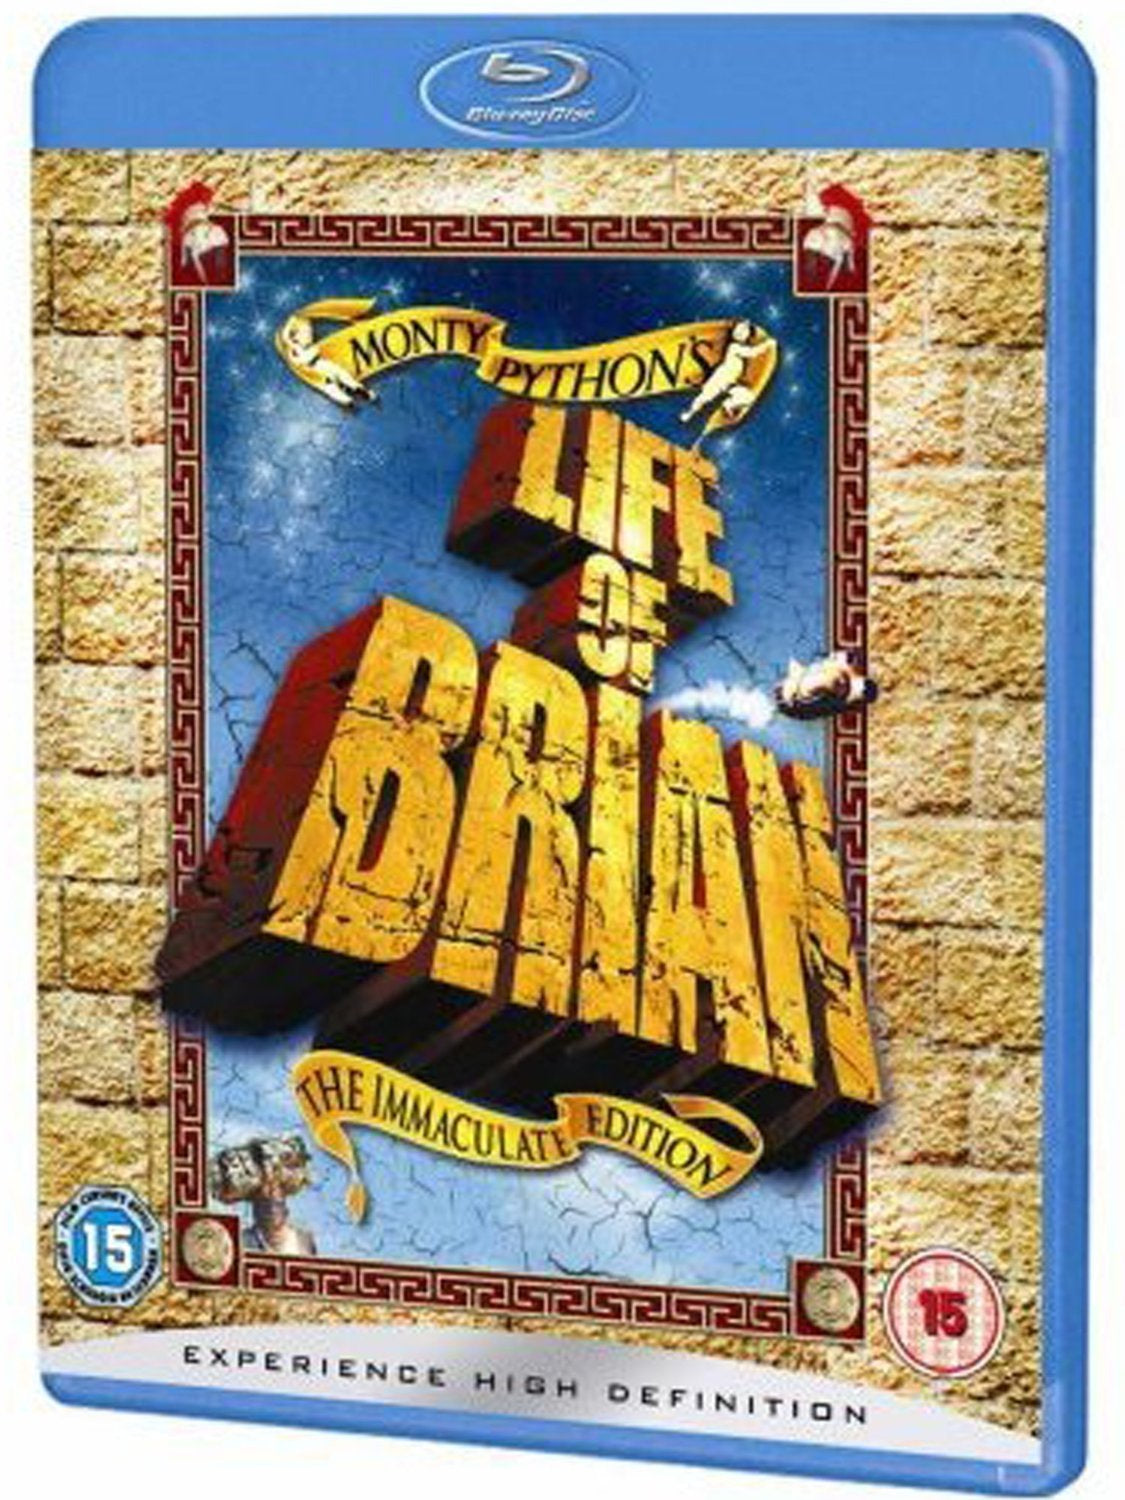 Monty Python's Life of Brian—The Immaculate Edition